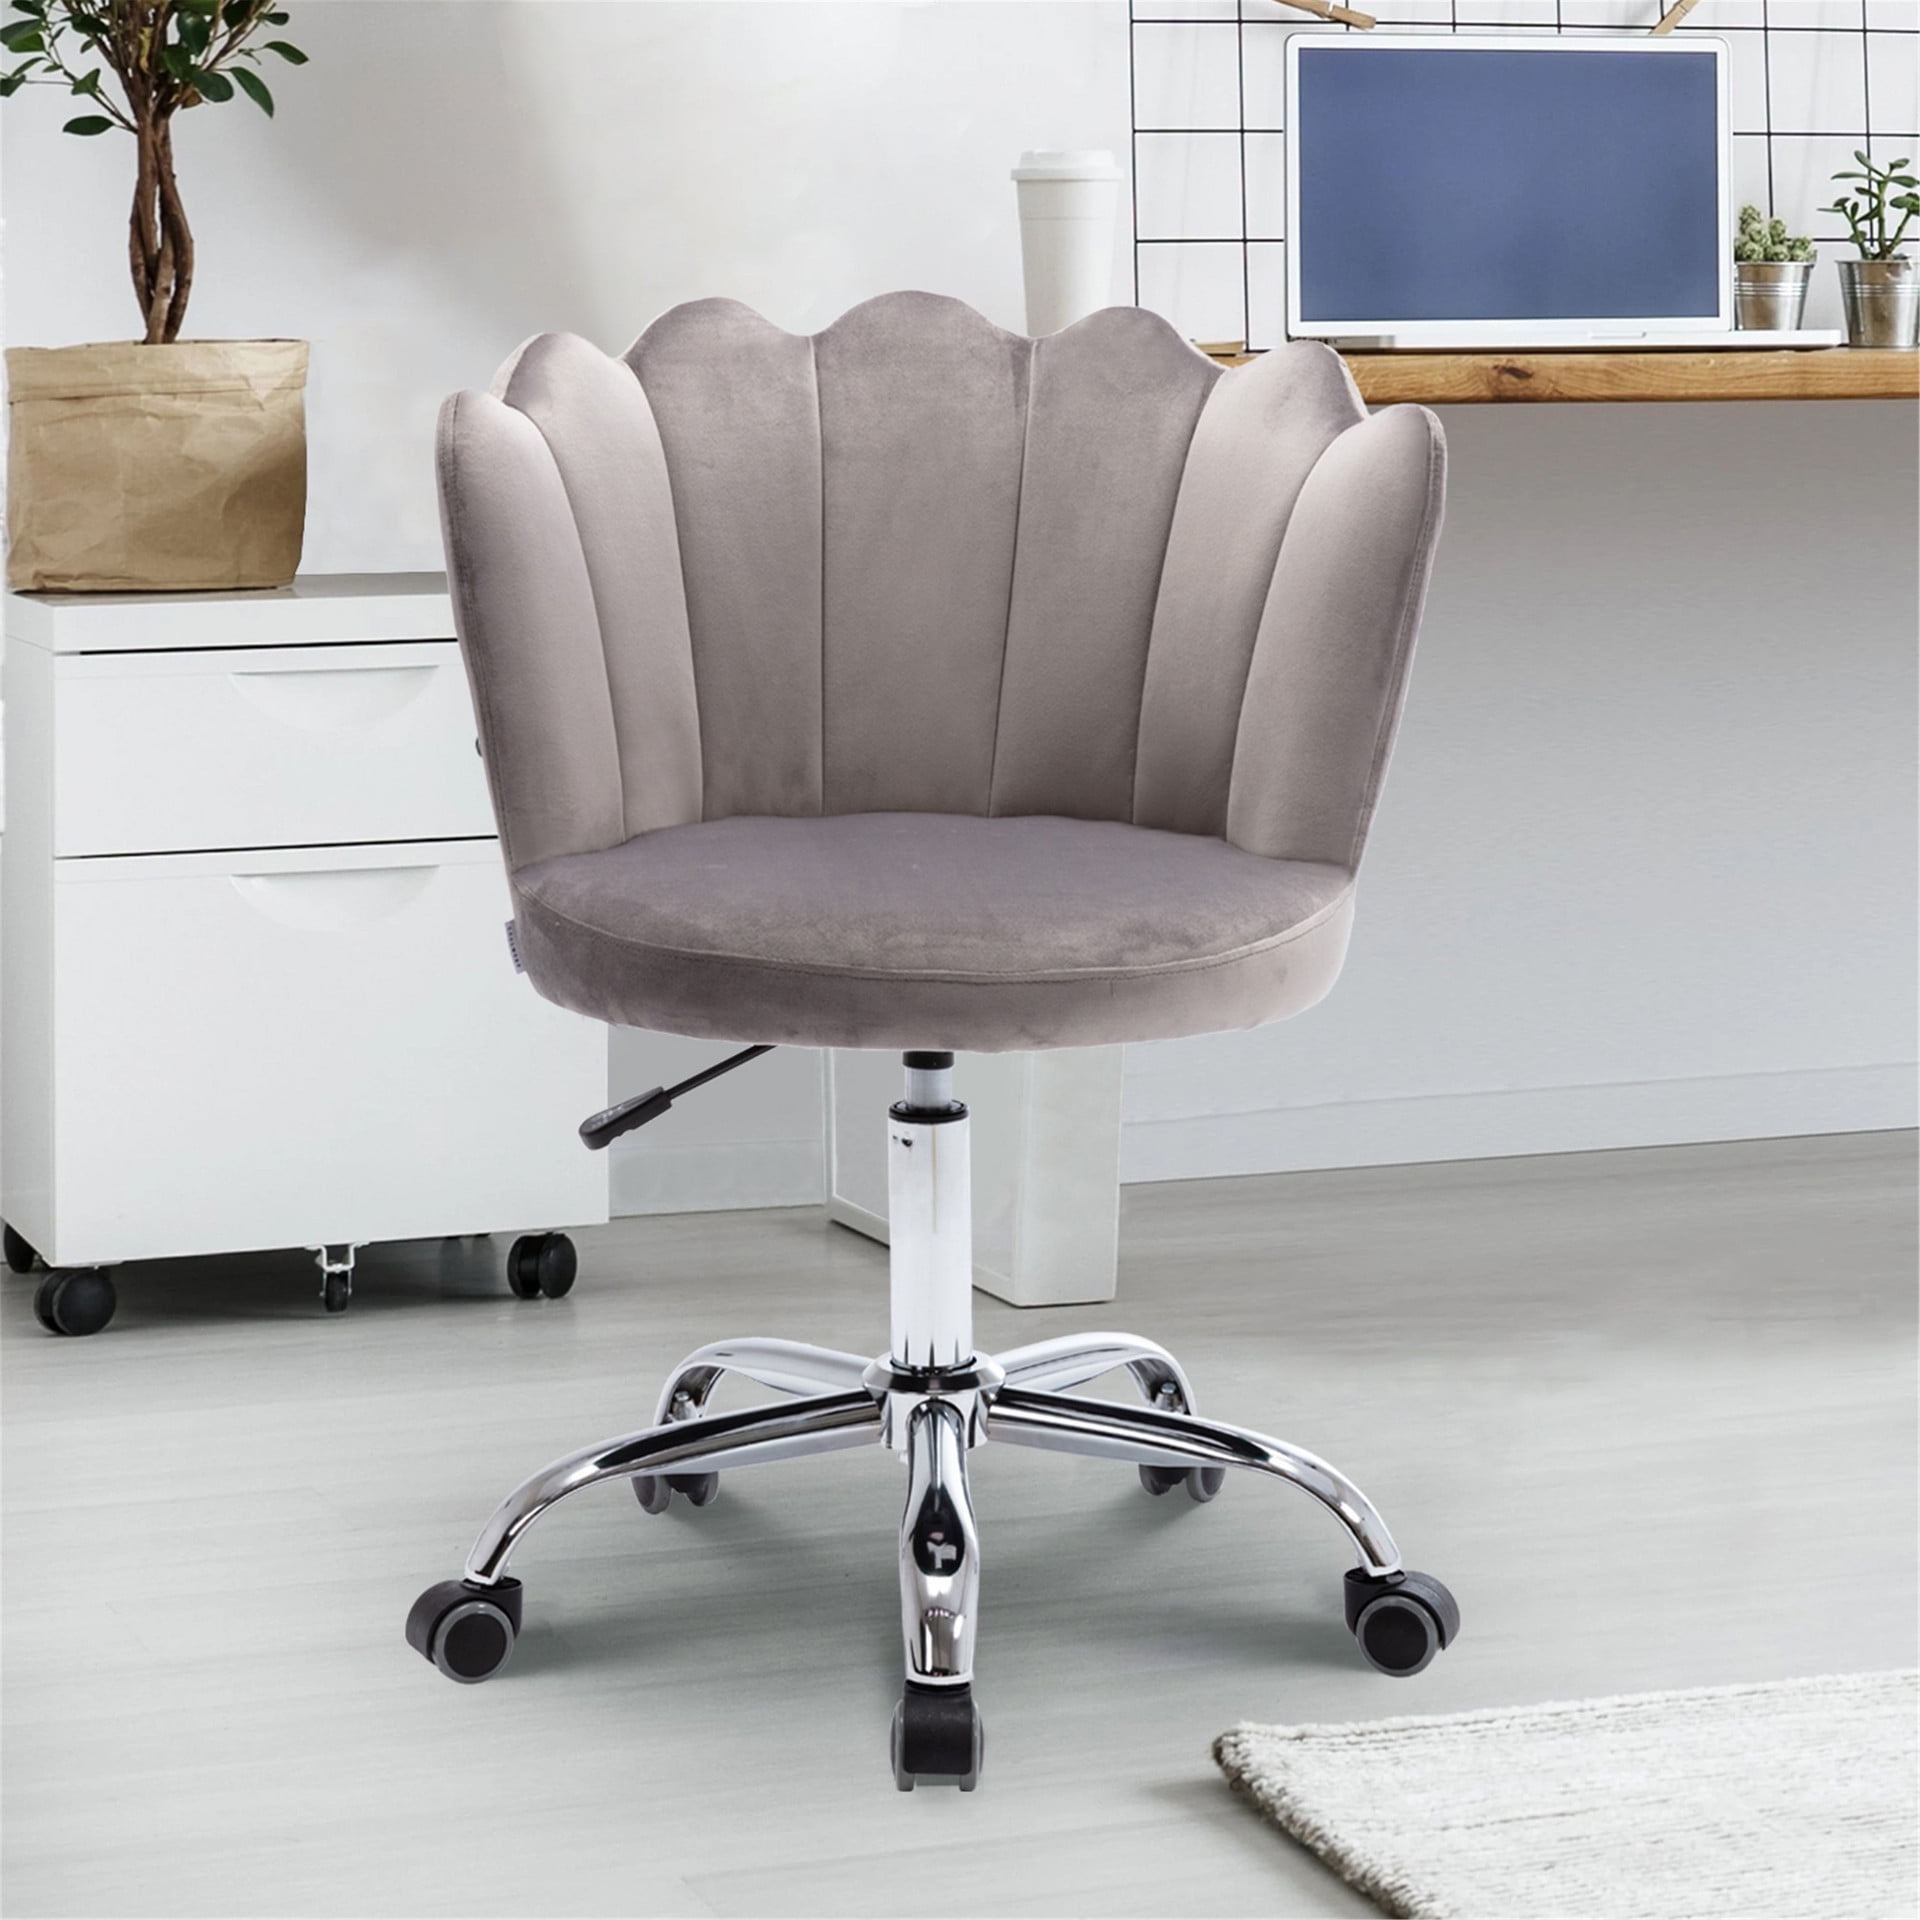 Details about   Armless Office Chair Adjustable Height Swivel Task Chair Wheels Mid Back Leather 